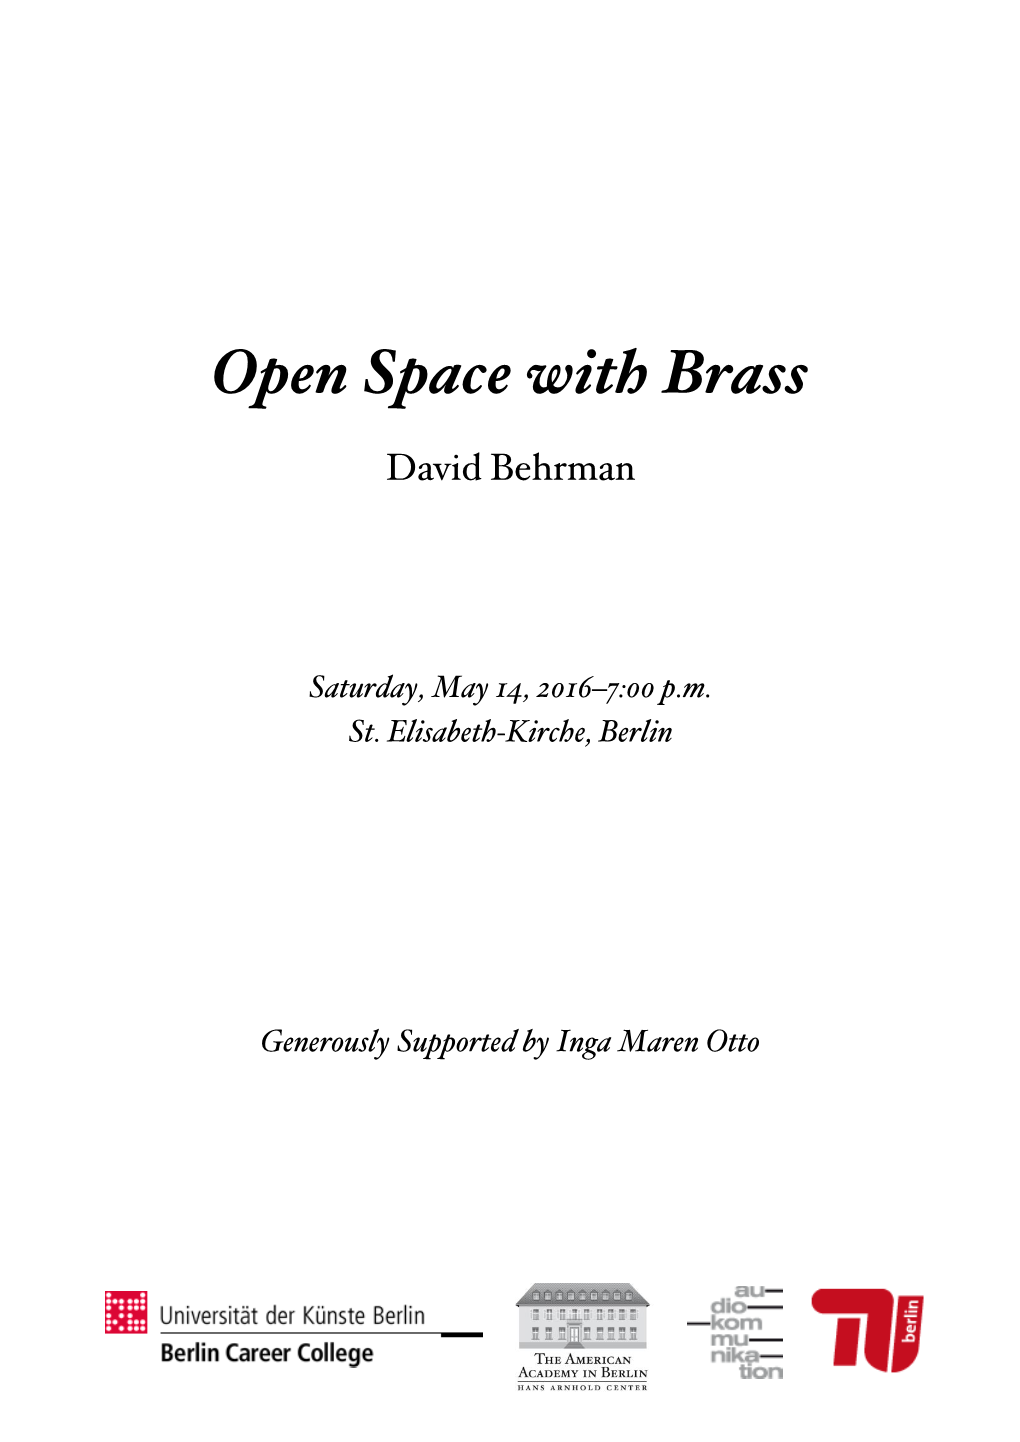 Open Space with Brass